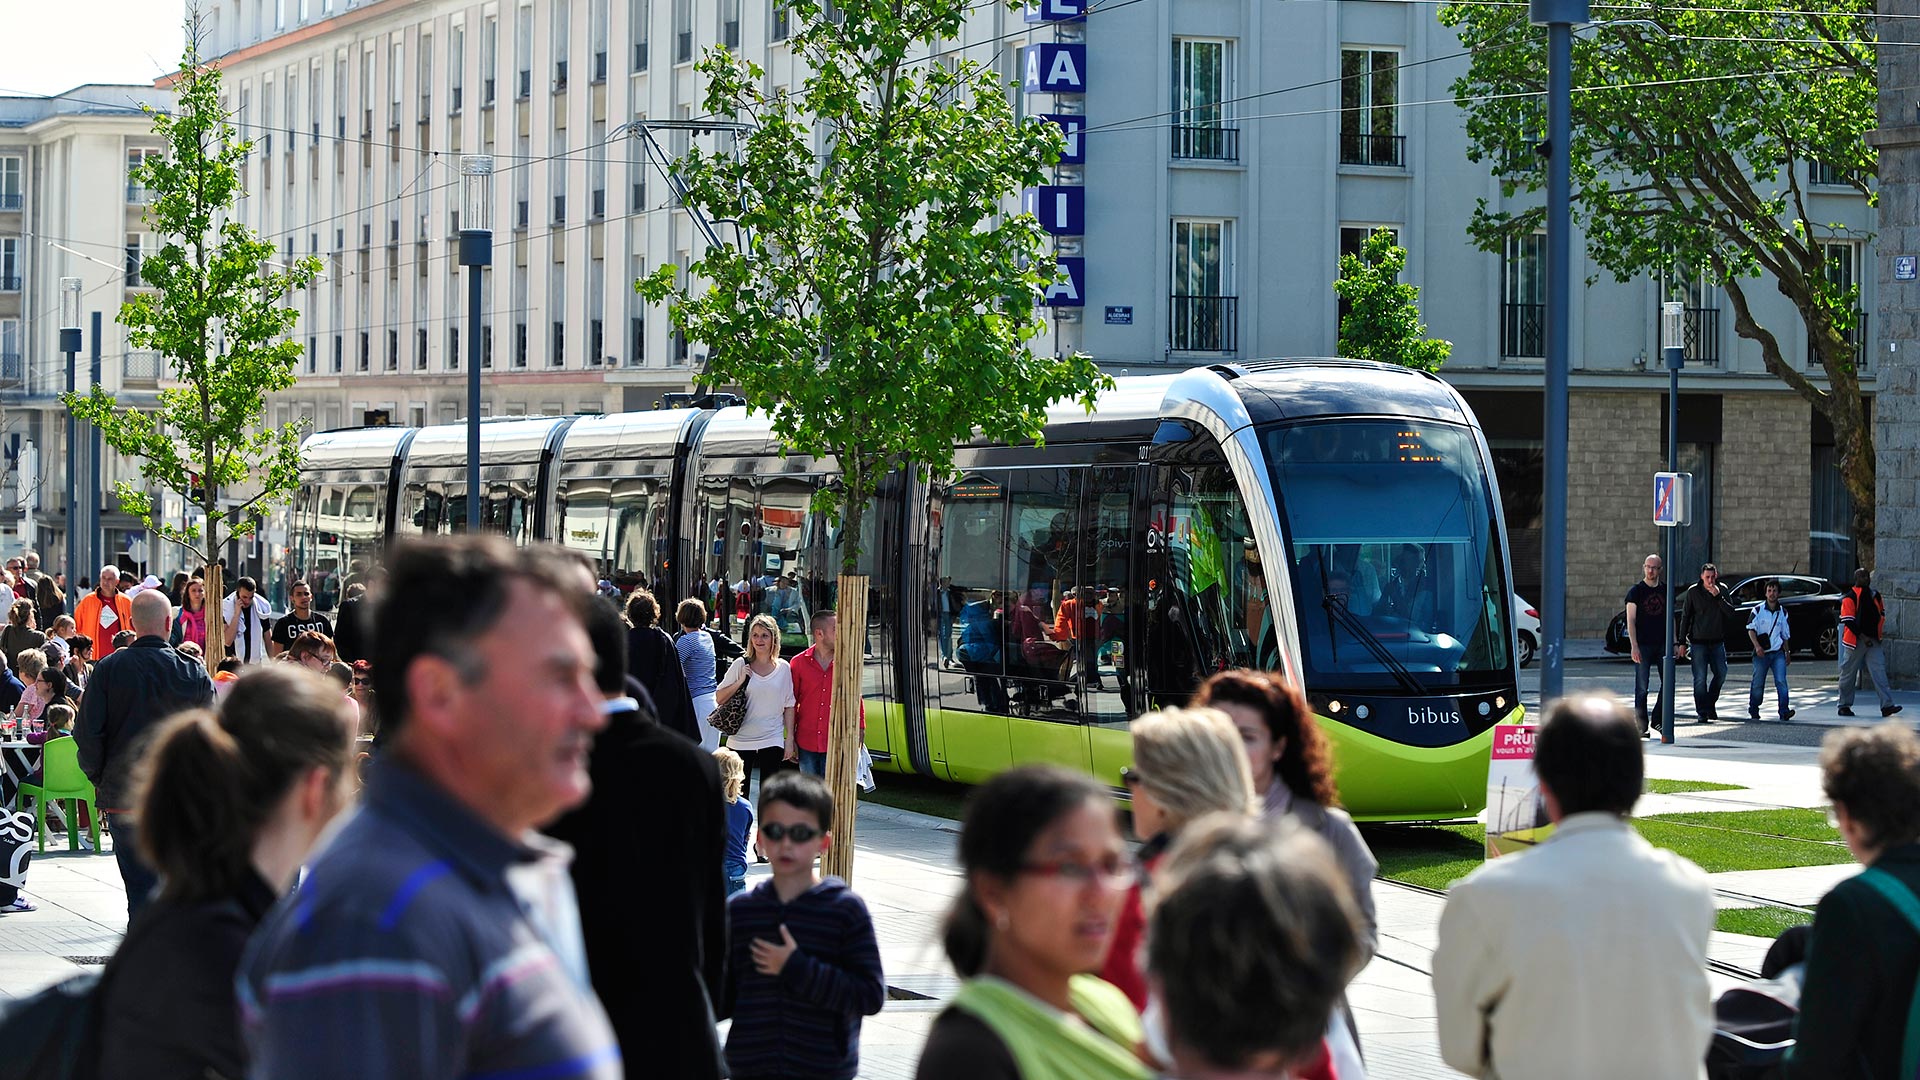 Security & Protection of Information : Brest Tramway